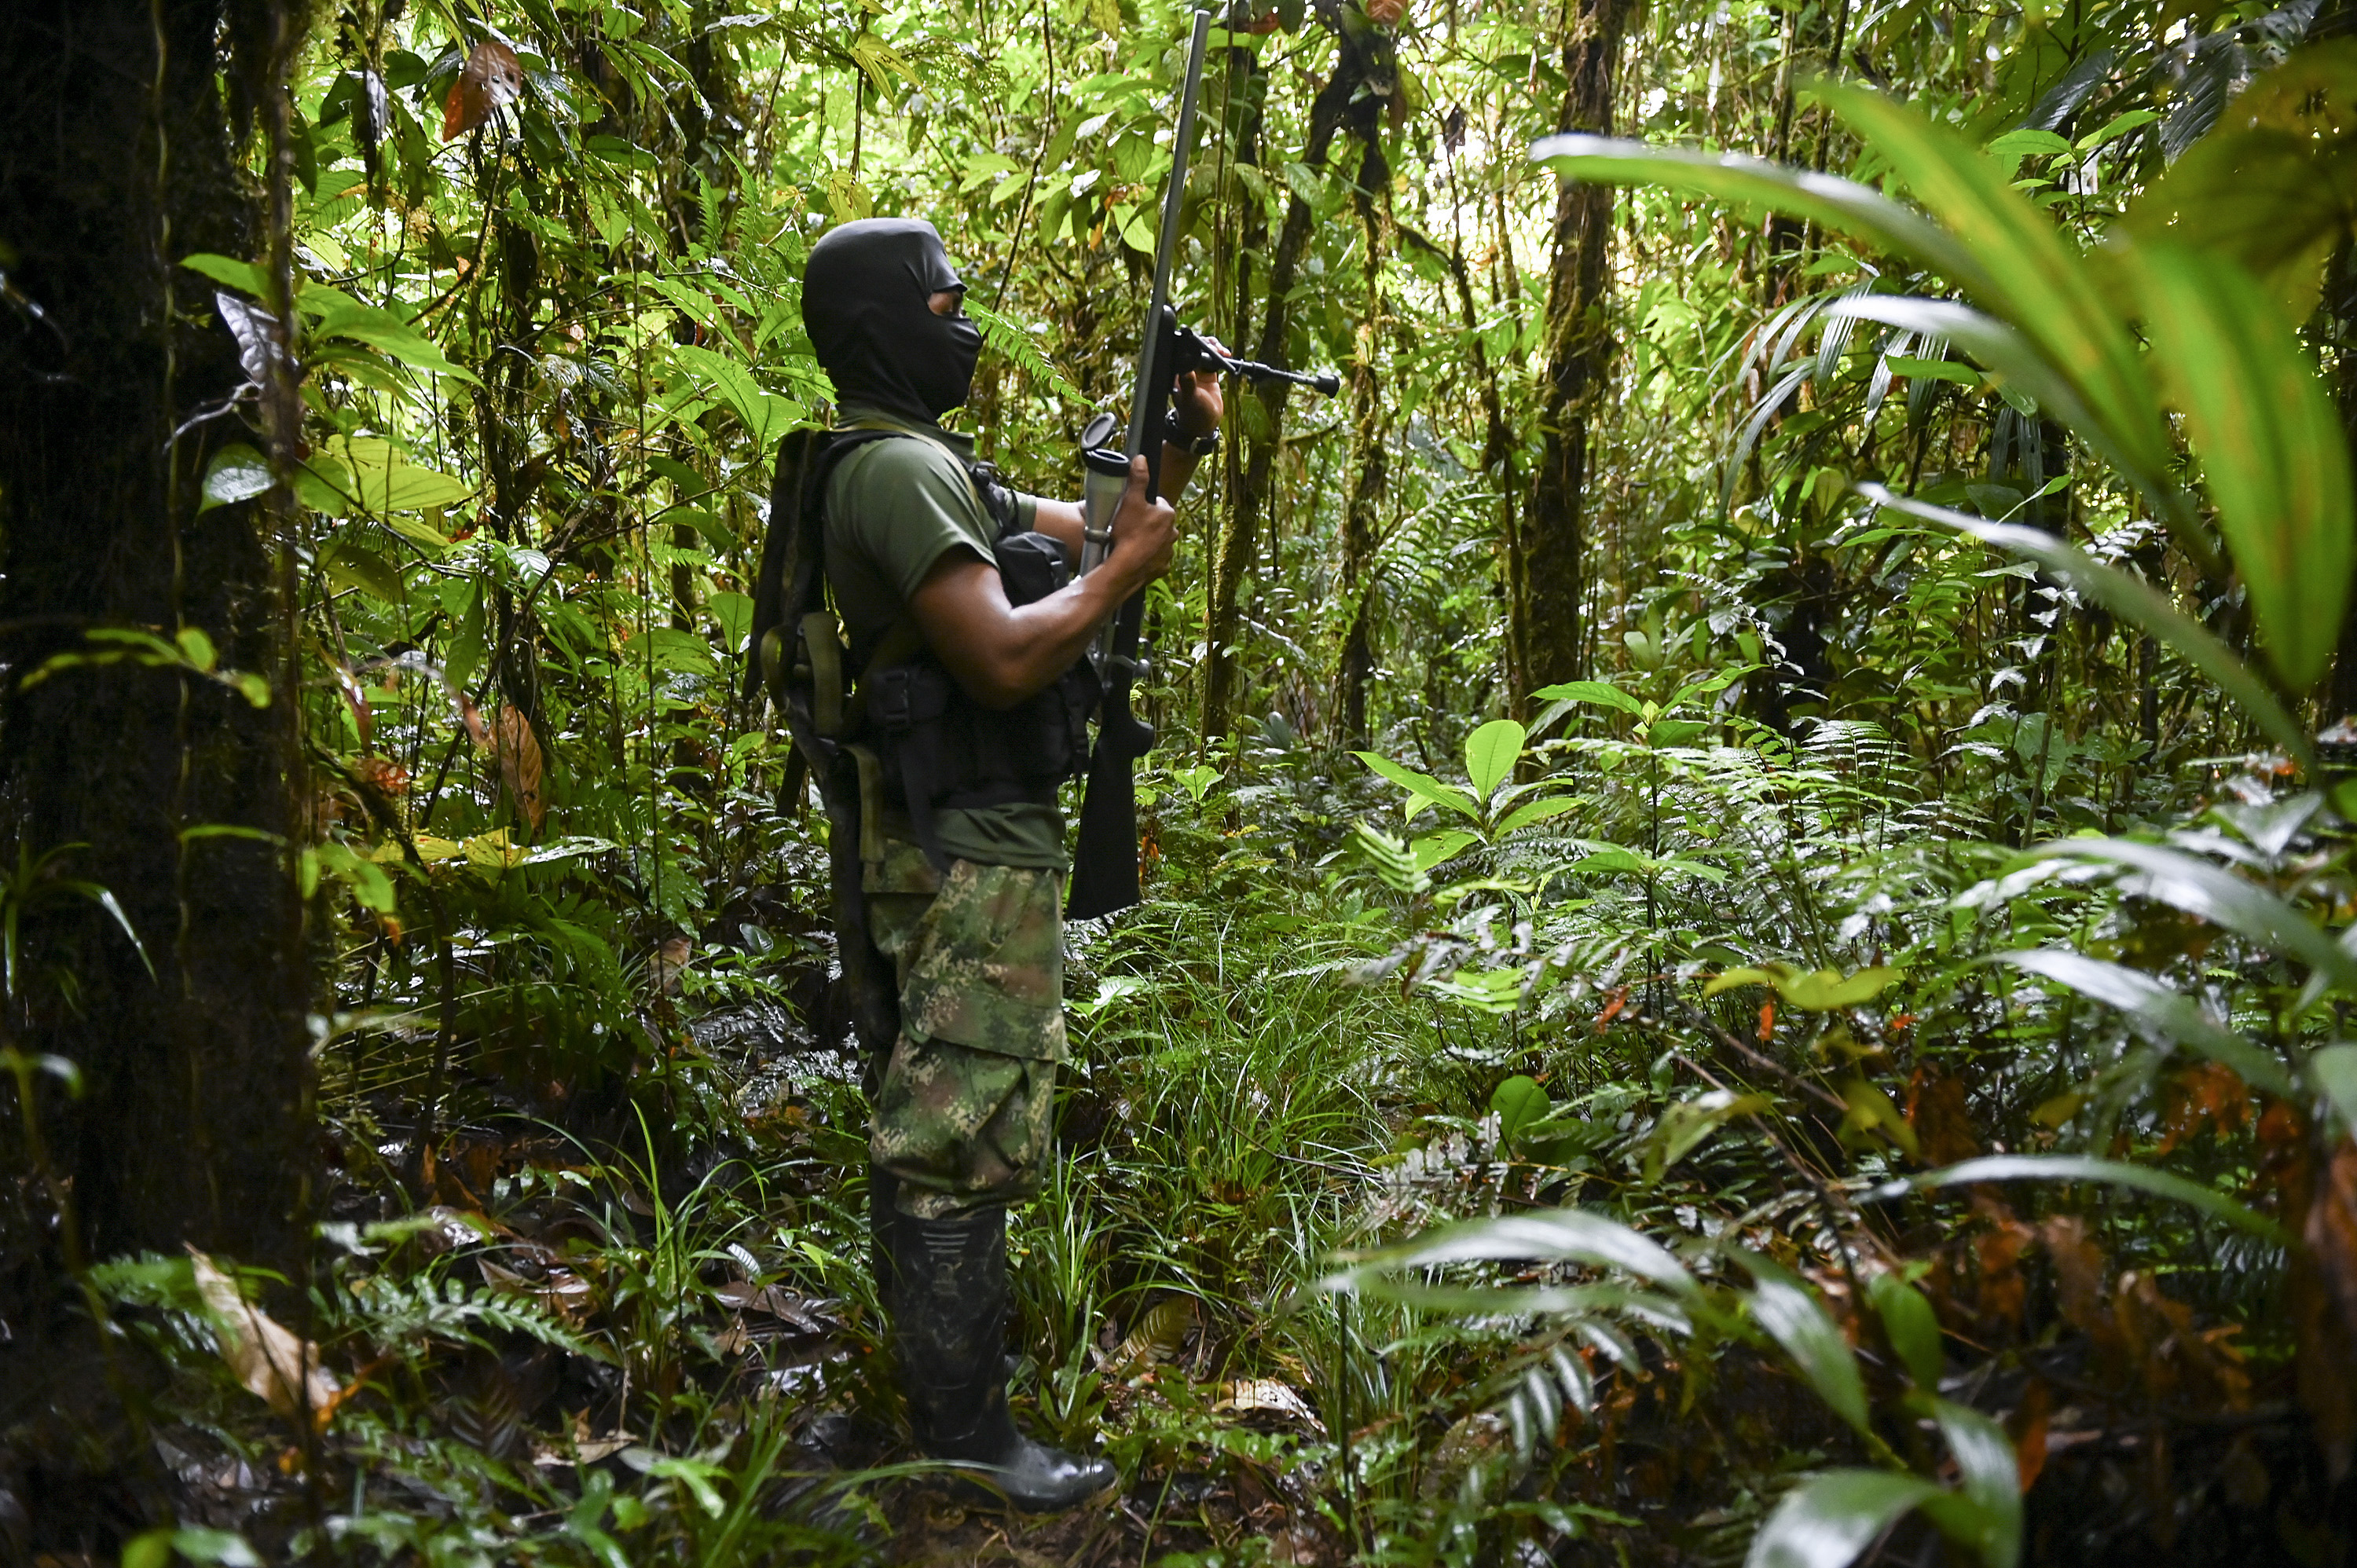 Members of the National Liberation Army (ELN) during training in the jungle